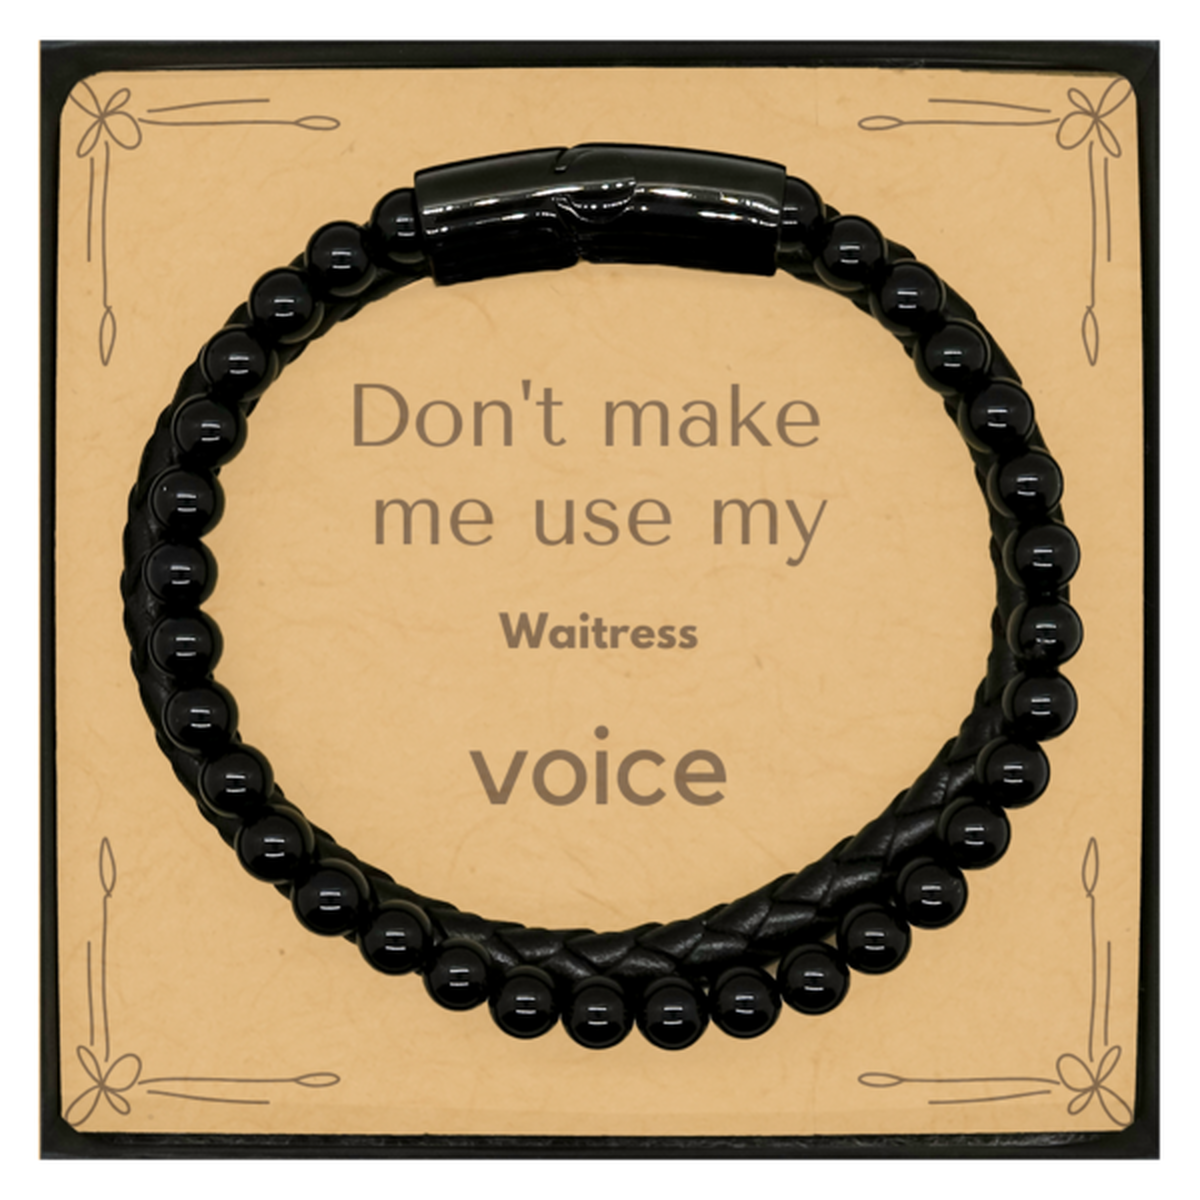 Don't make me use my Waitress voice, Sarcasm Waitress Card Gifts, Christmas Waitress Stone Leather Bracelets Birthday Unique Gifts For Waitress Coworkers, Men, Women, Colleague, Friends